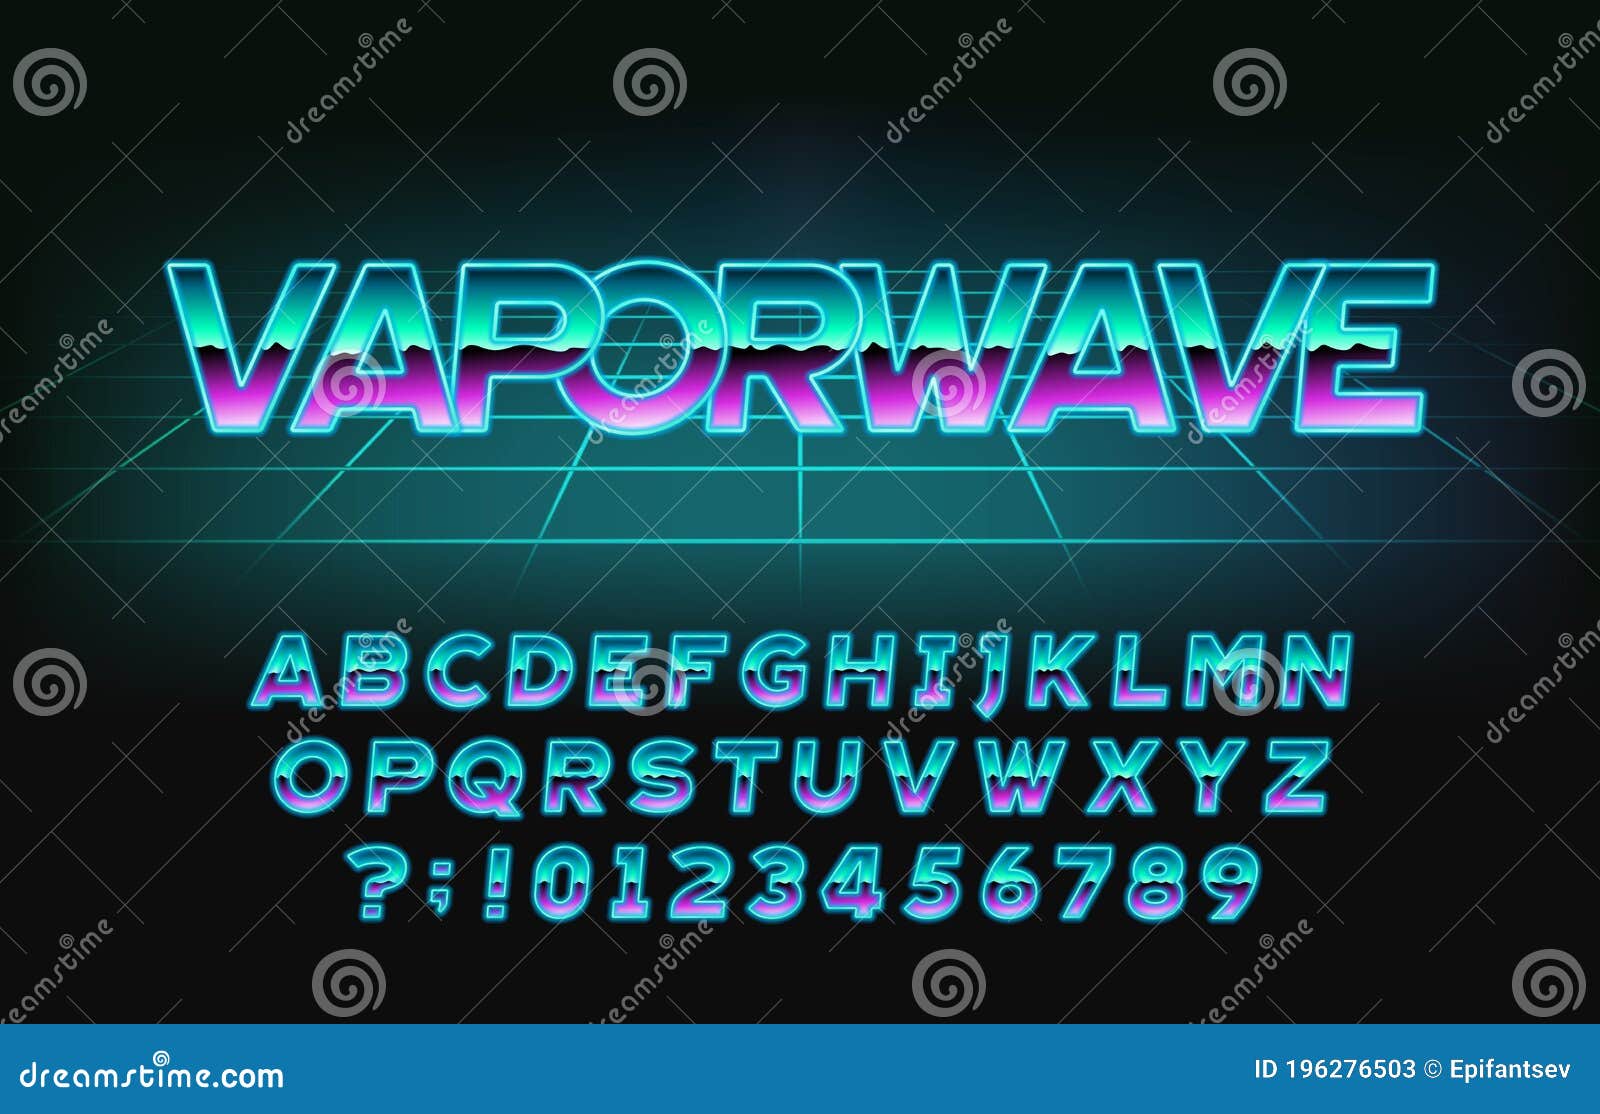 vaporwave alphabet font. retro letters, numbers and s in 80s style.